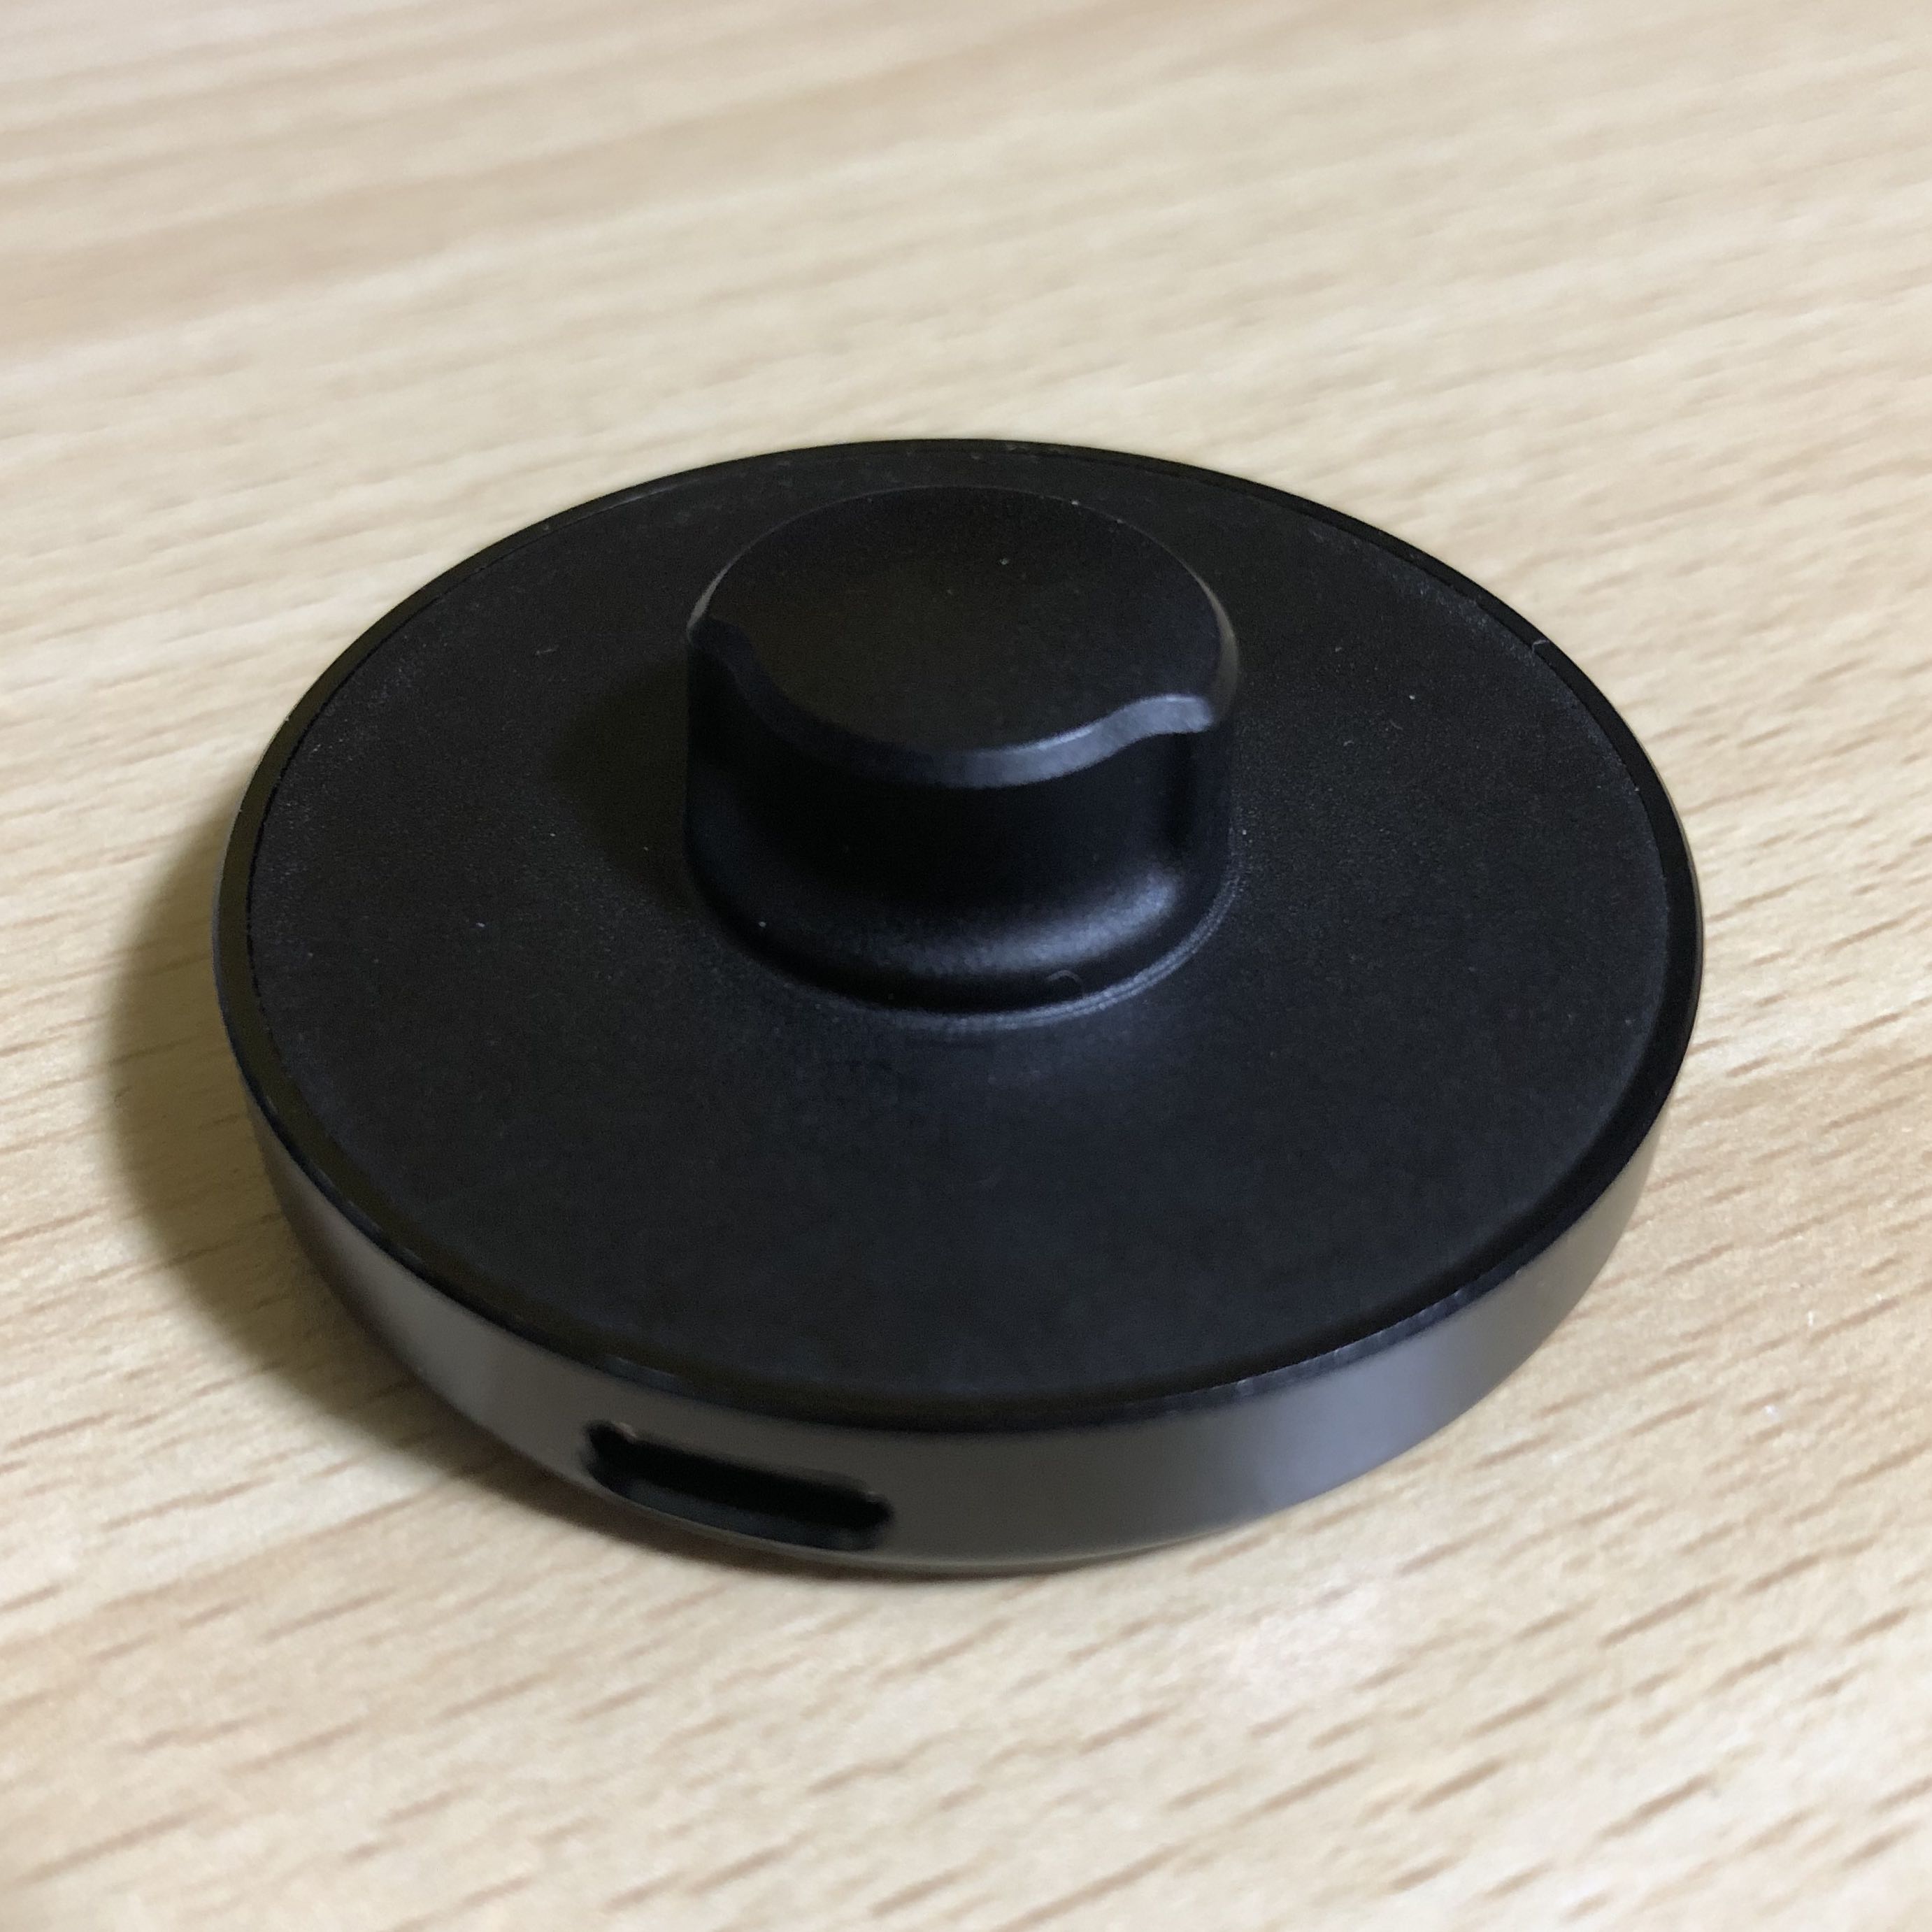 Oura Ring用の充電器